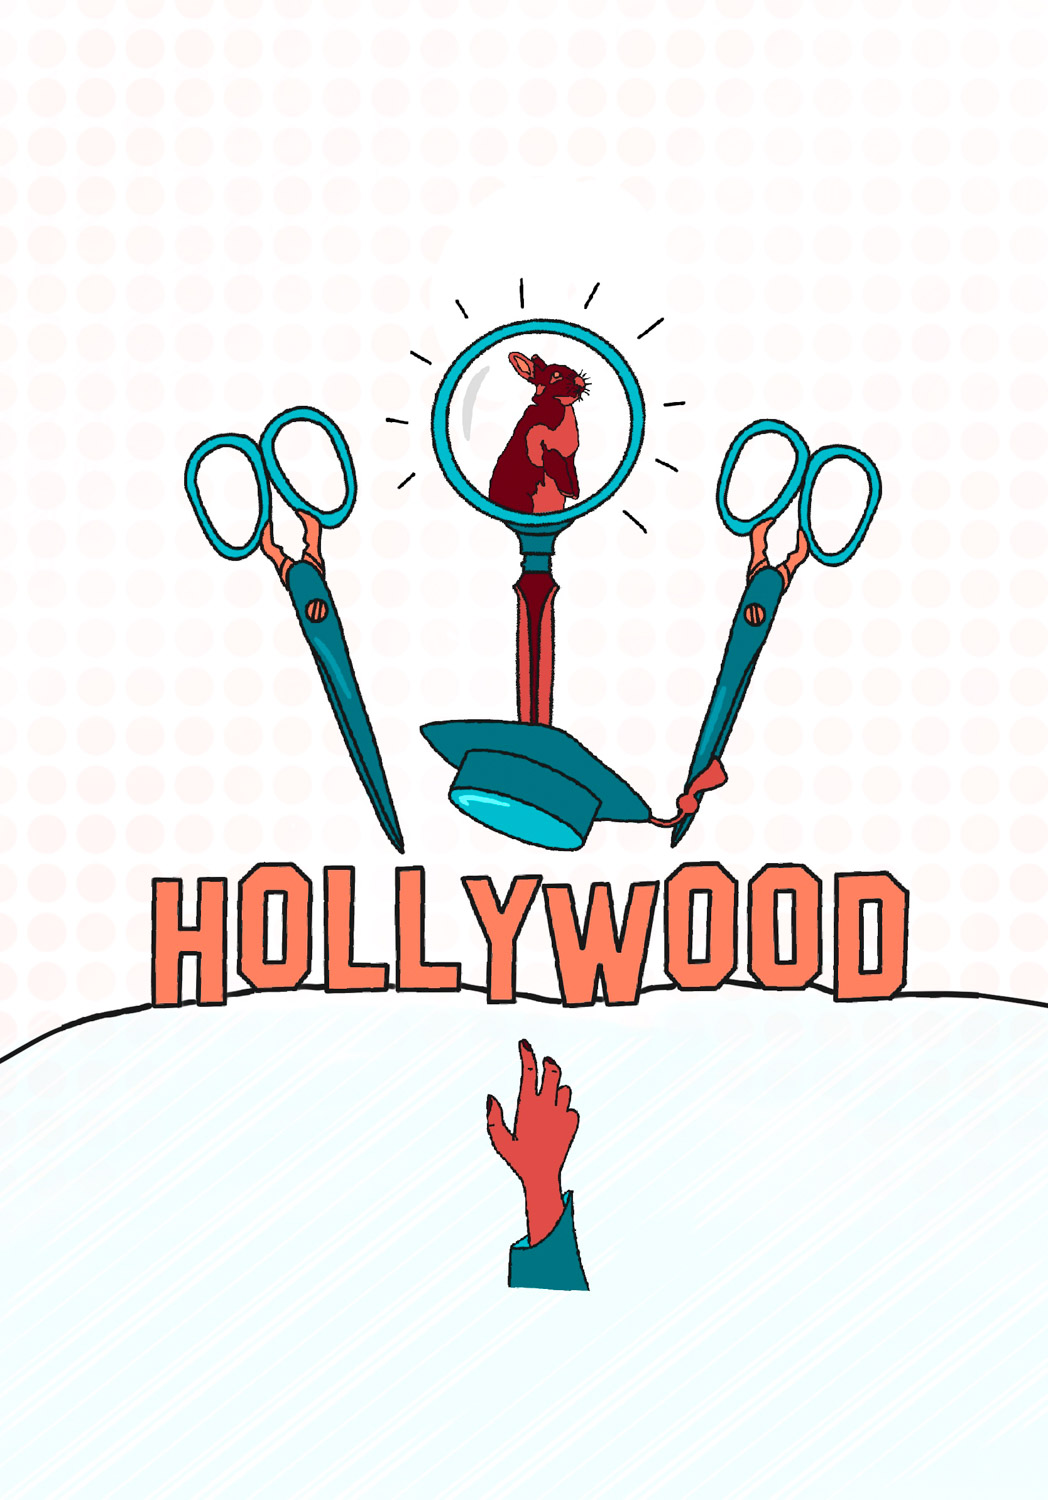 An illustration depicting scissors, a magnifying glass, a rabbit, the Hollywood sign, and a hand.